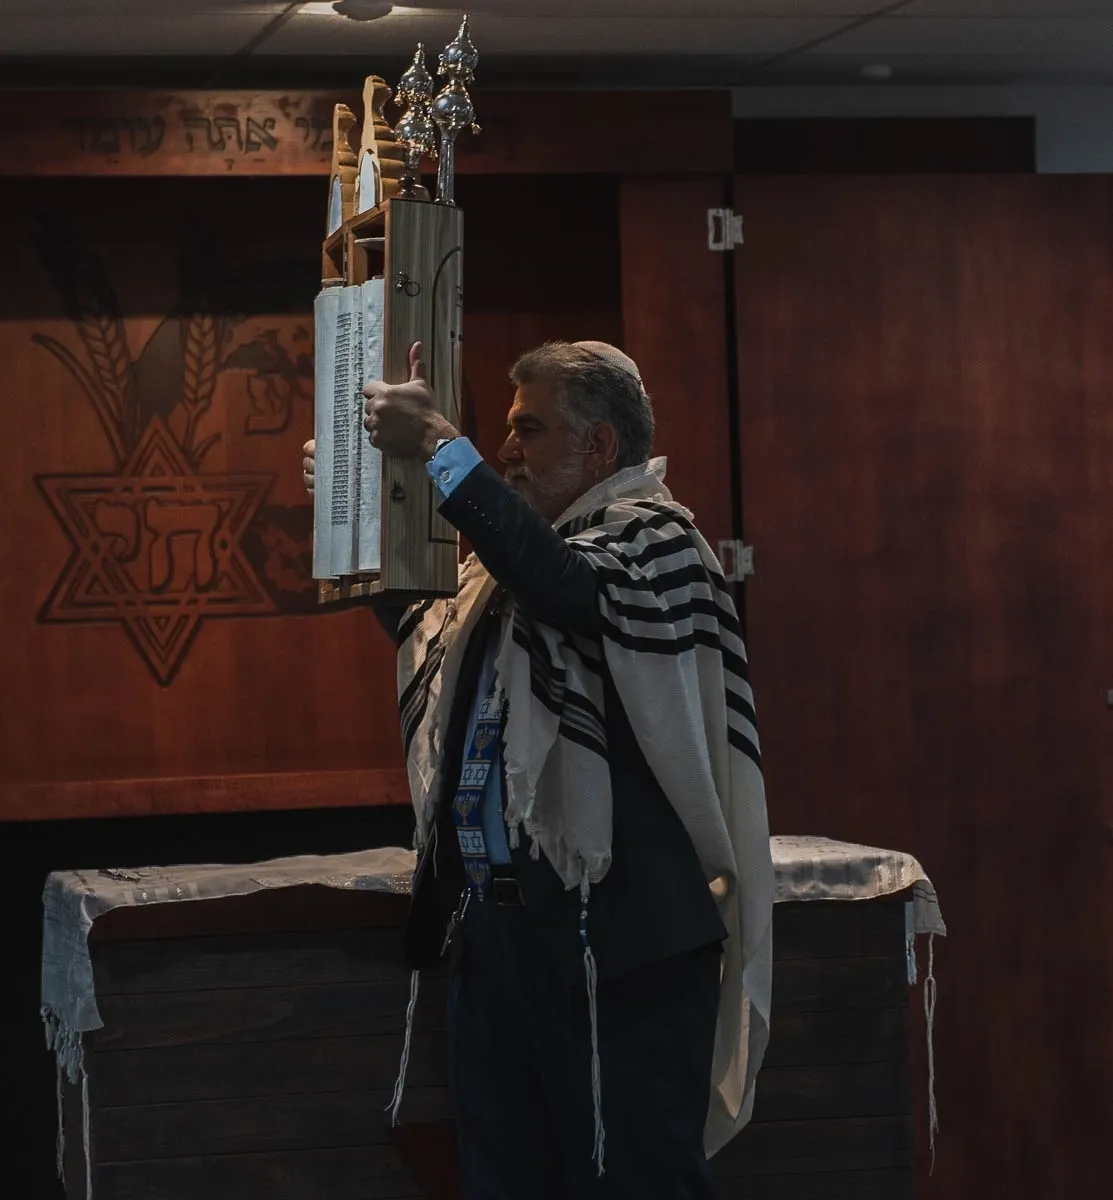 A man in a synagogue holding up a torah.